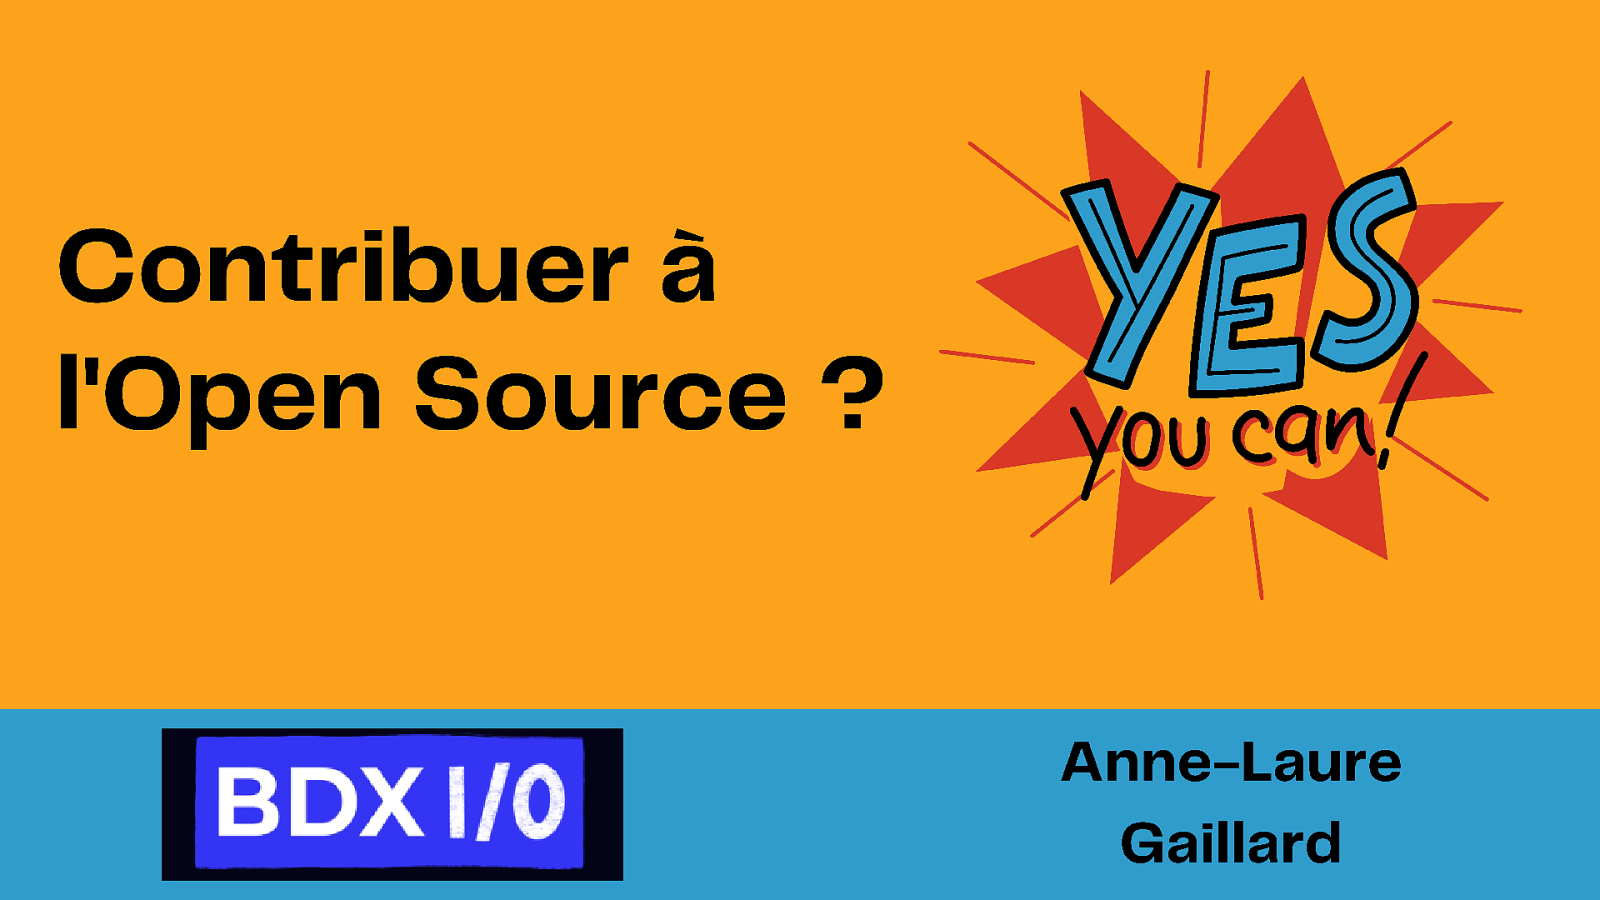 Contribuer à l’Open Source ? Yes, you can!